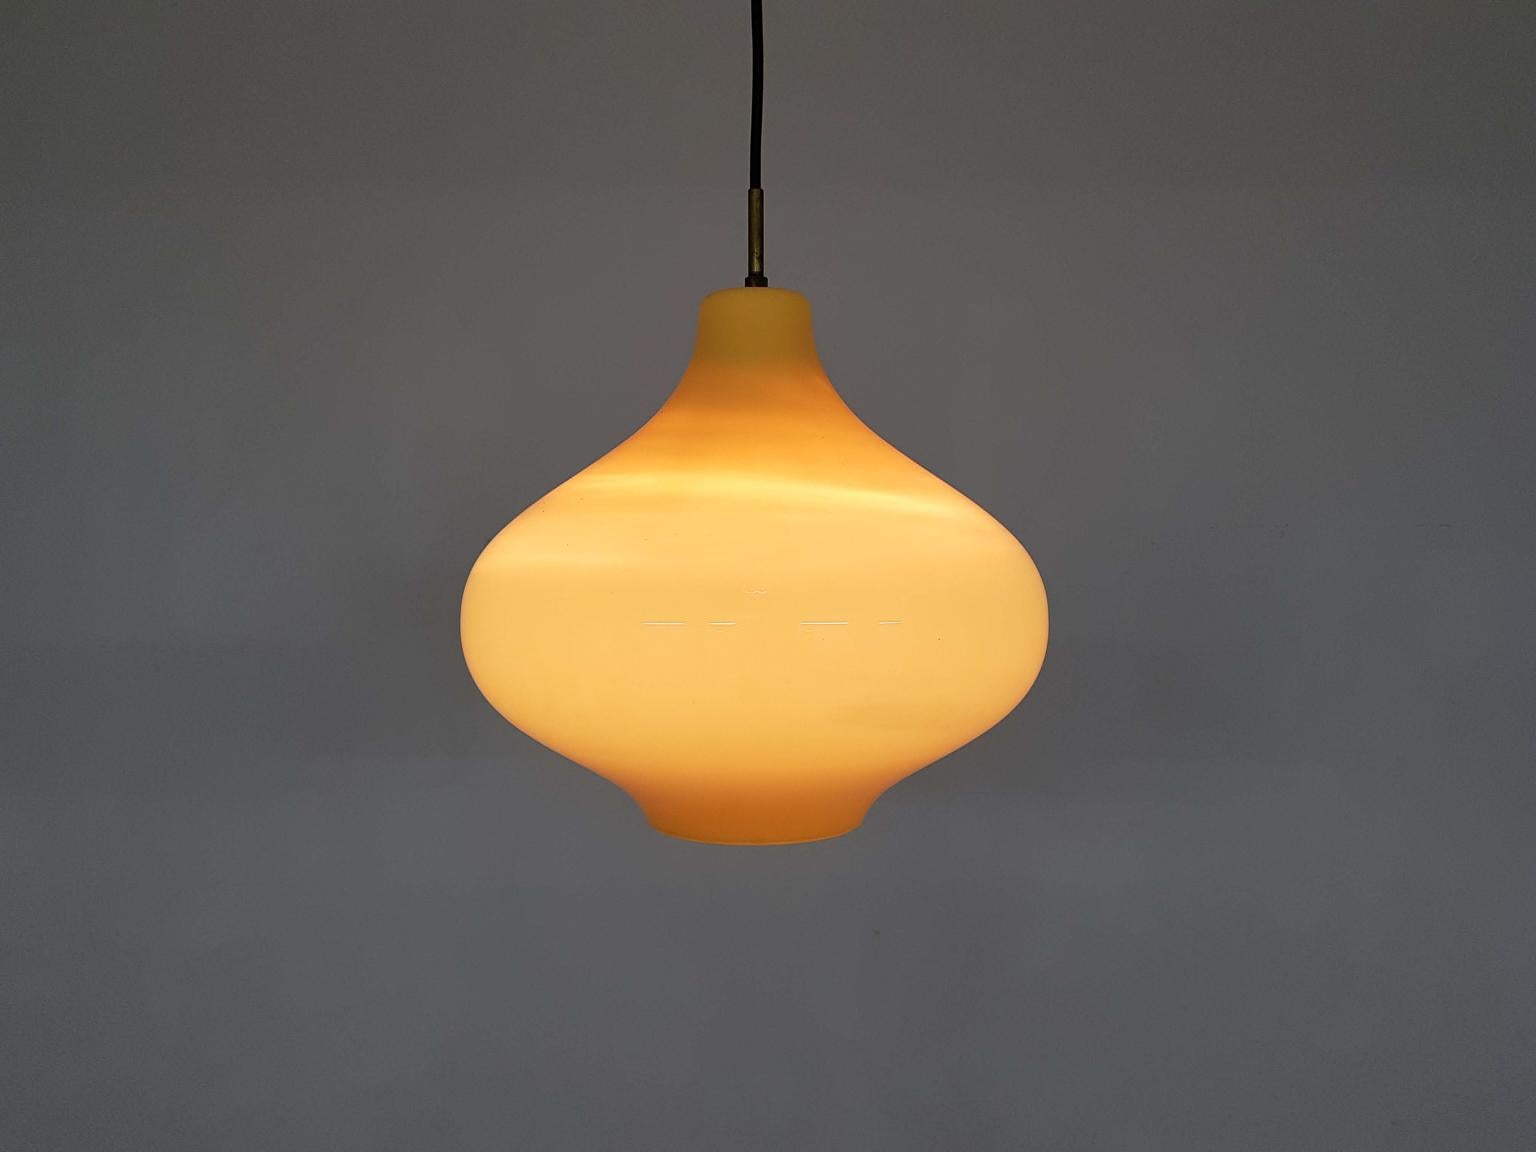 Amazing yellow handblown pendant light by Italian designer Massimo Vignelli for Venini Murano.

In the midcentury, the most beautiful glass probably came from Italy, Murano. It was in Murano where they developed glass making like an art. Many